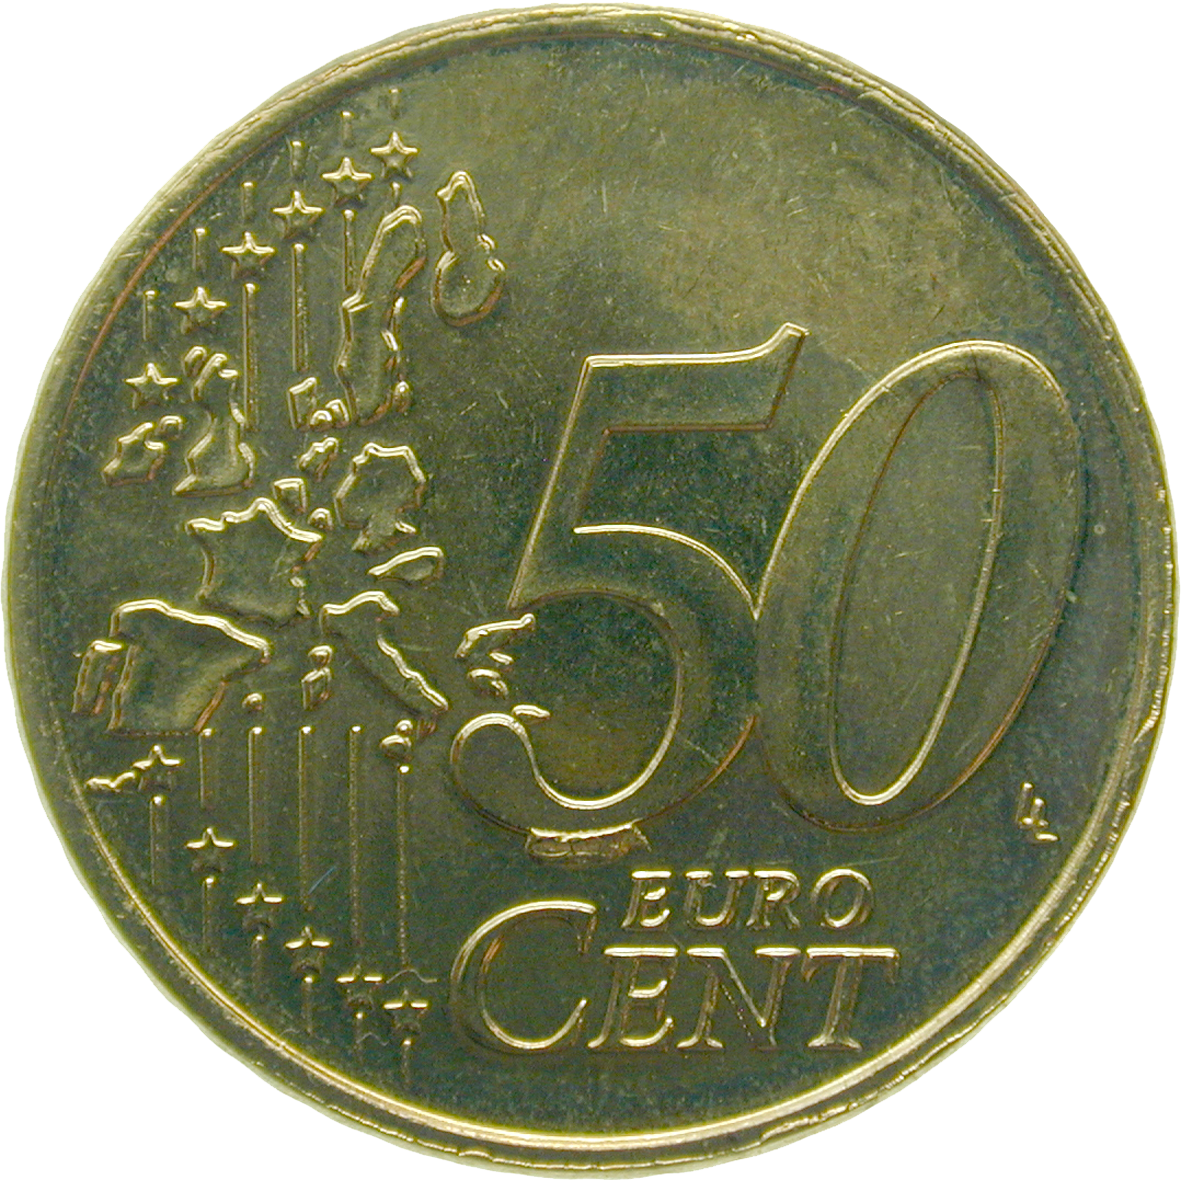 Grand Duchy of Luxembourg, Henri, 50 Euro Cent 2002 (obverse)